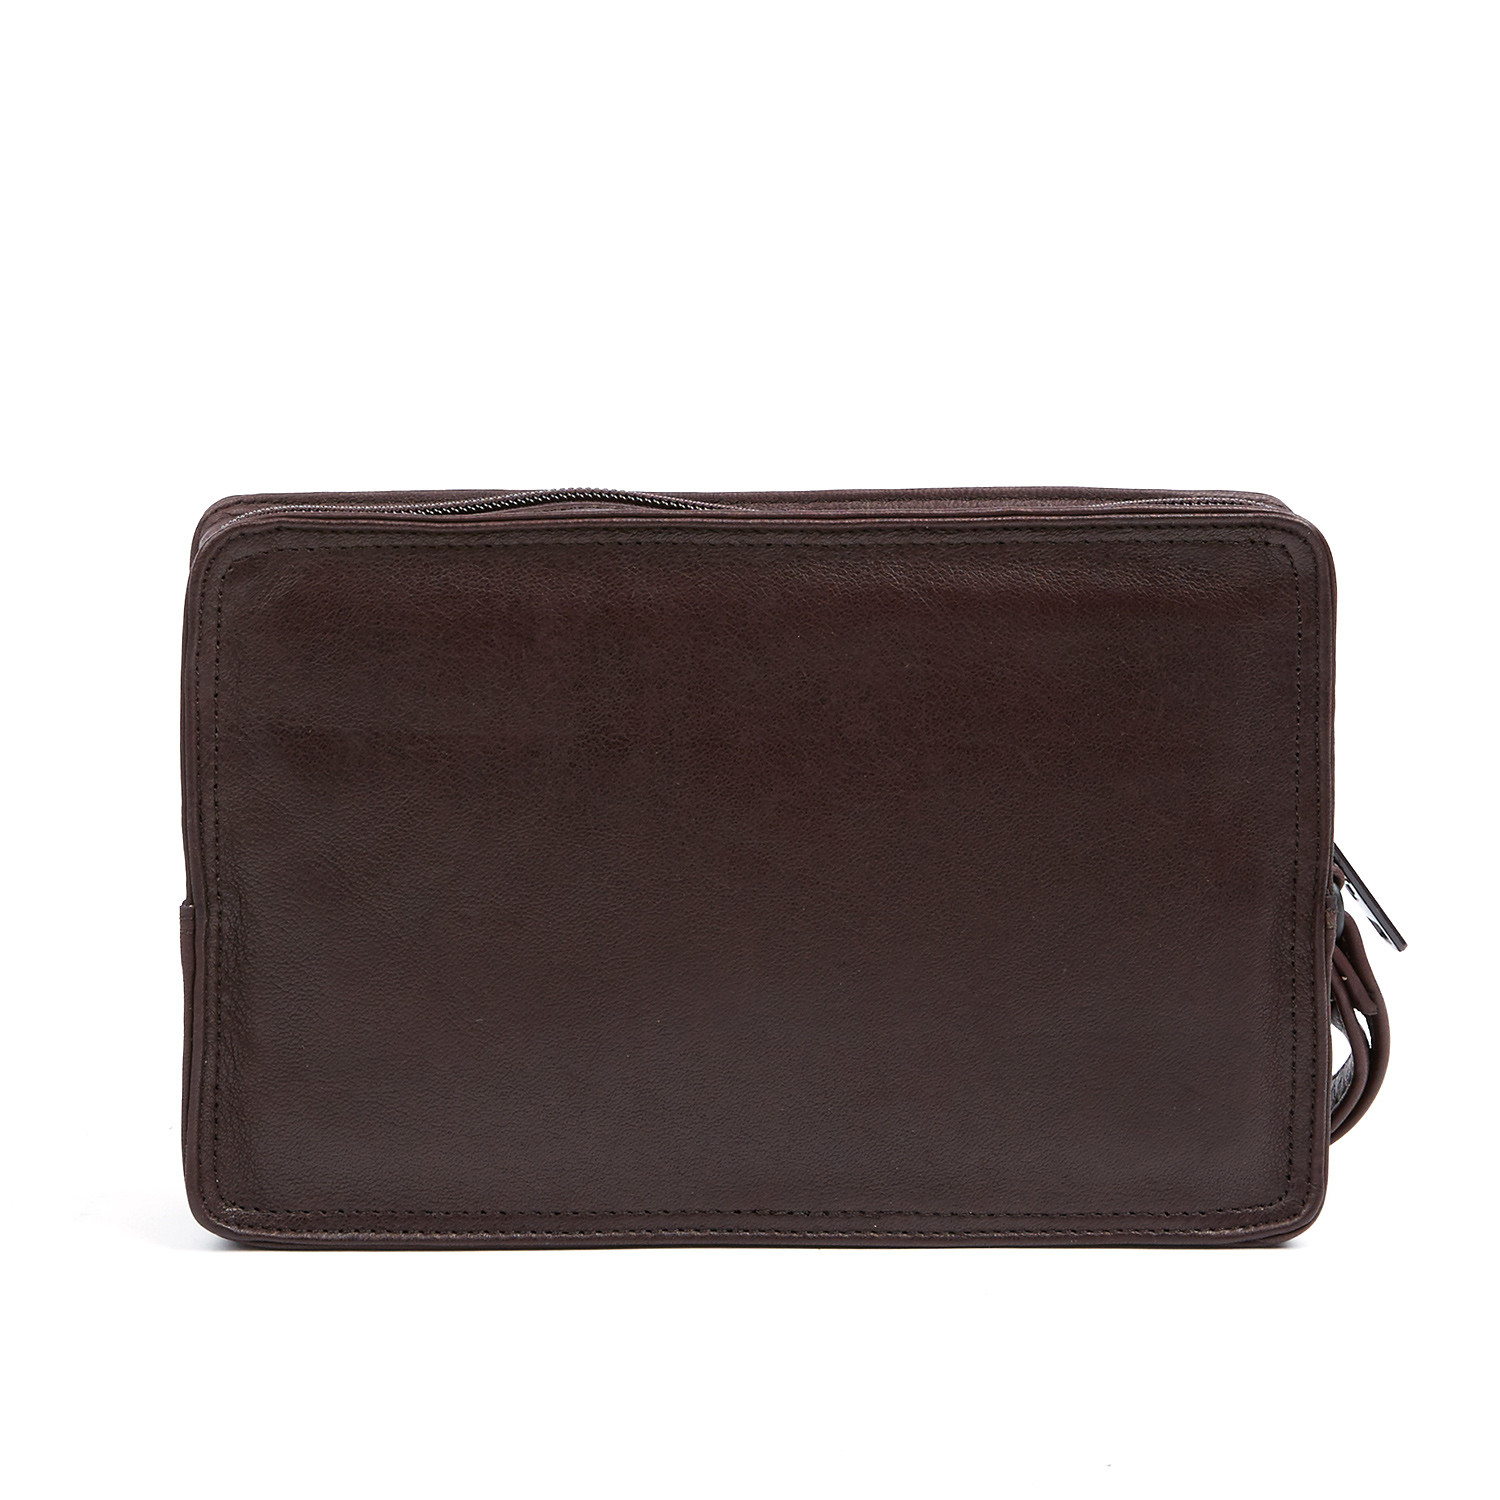 Small Leather Organizer Bag // Burgundy - Tanners Avenue - Touch of Modern